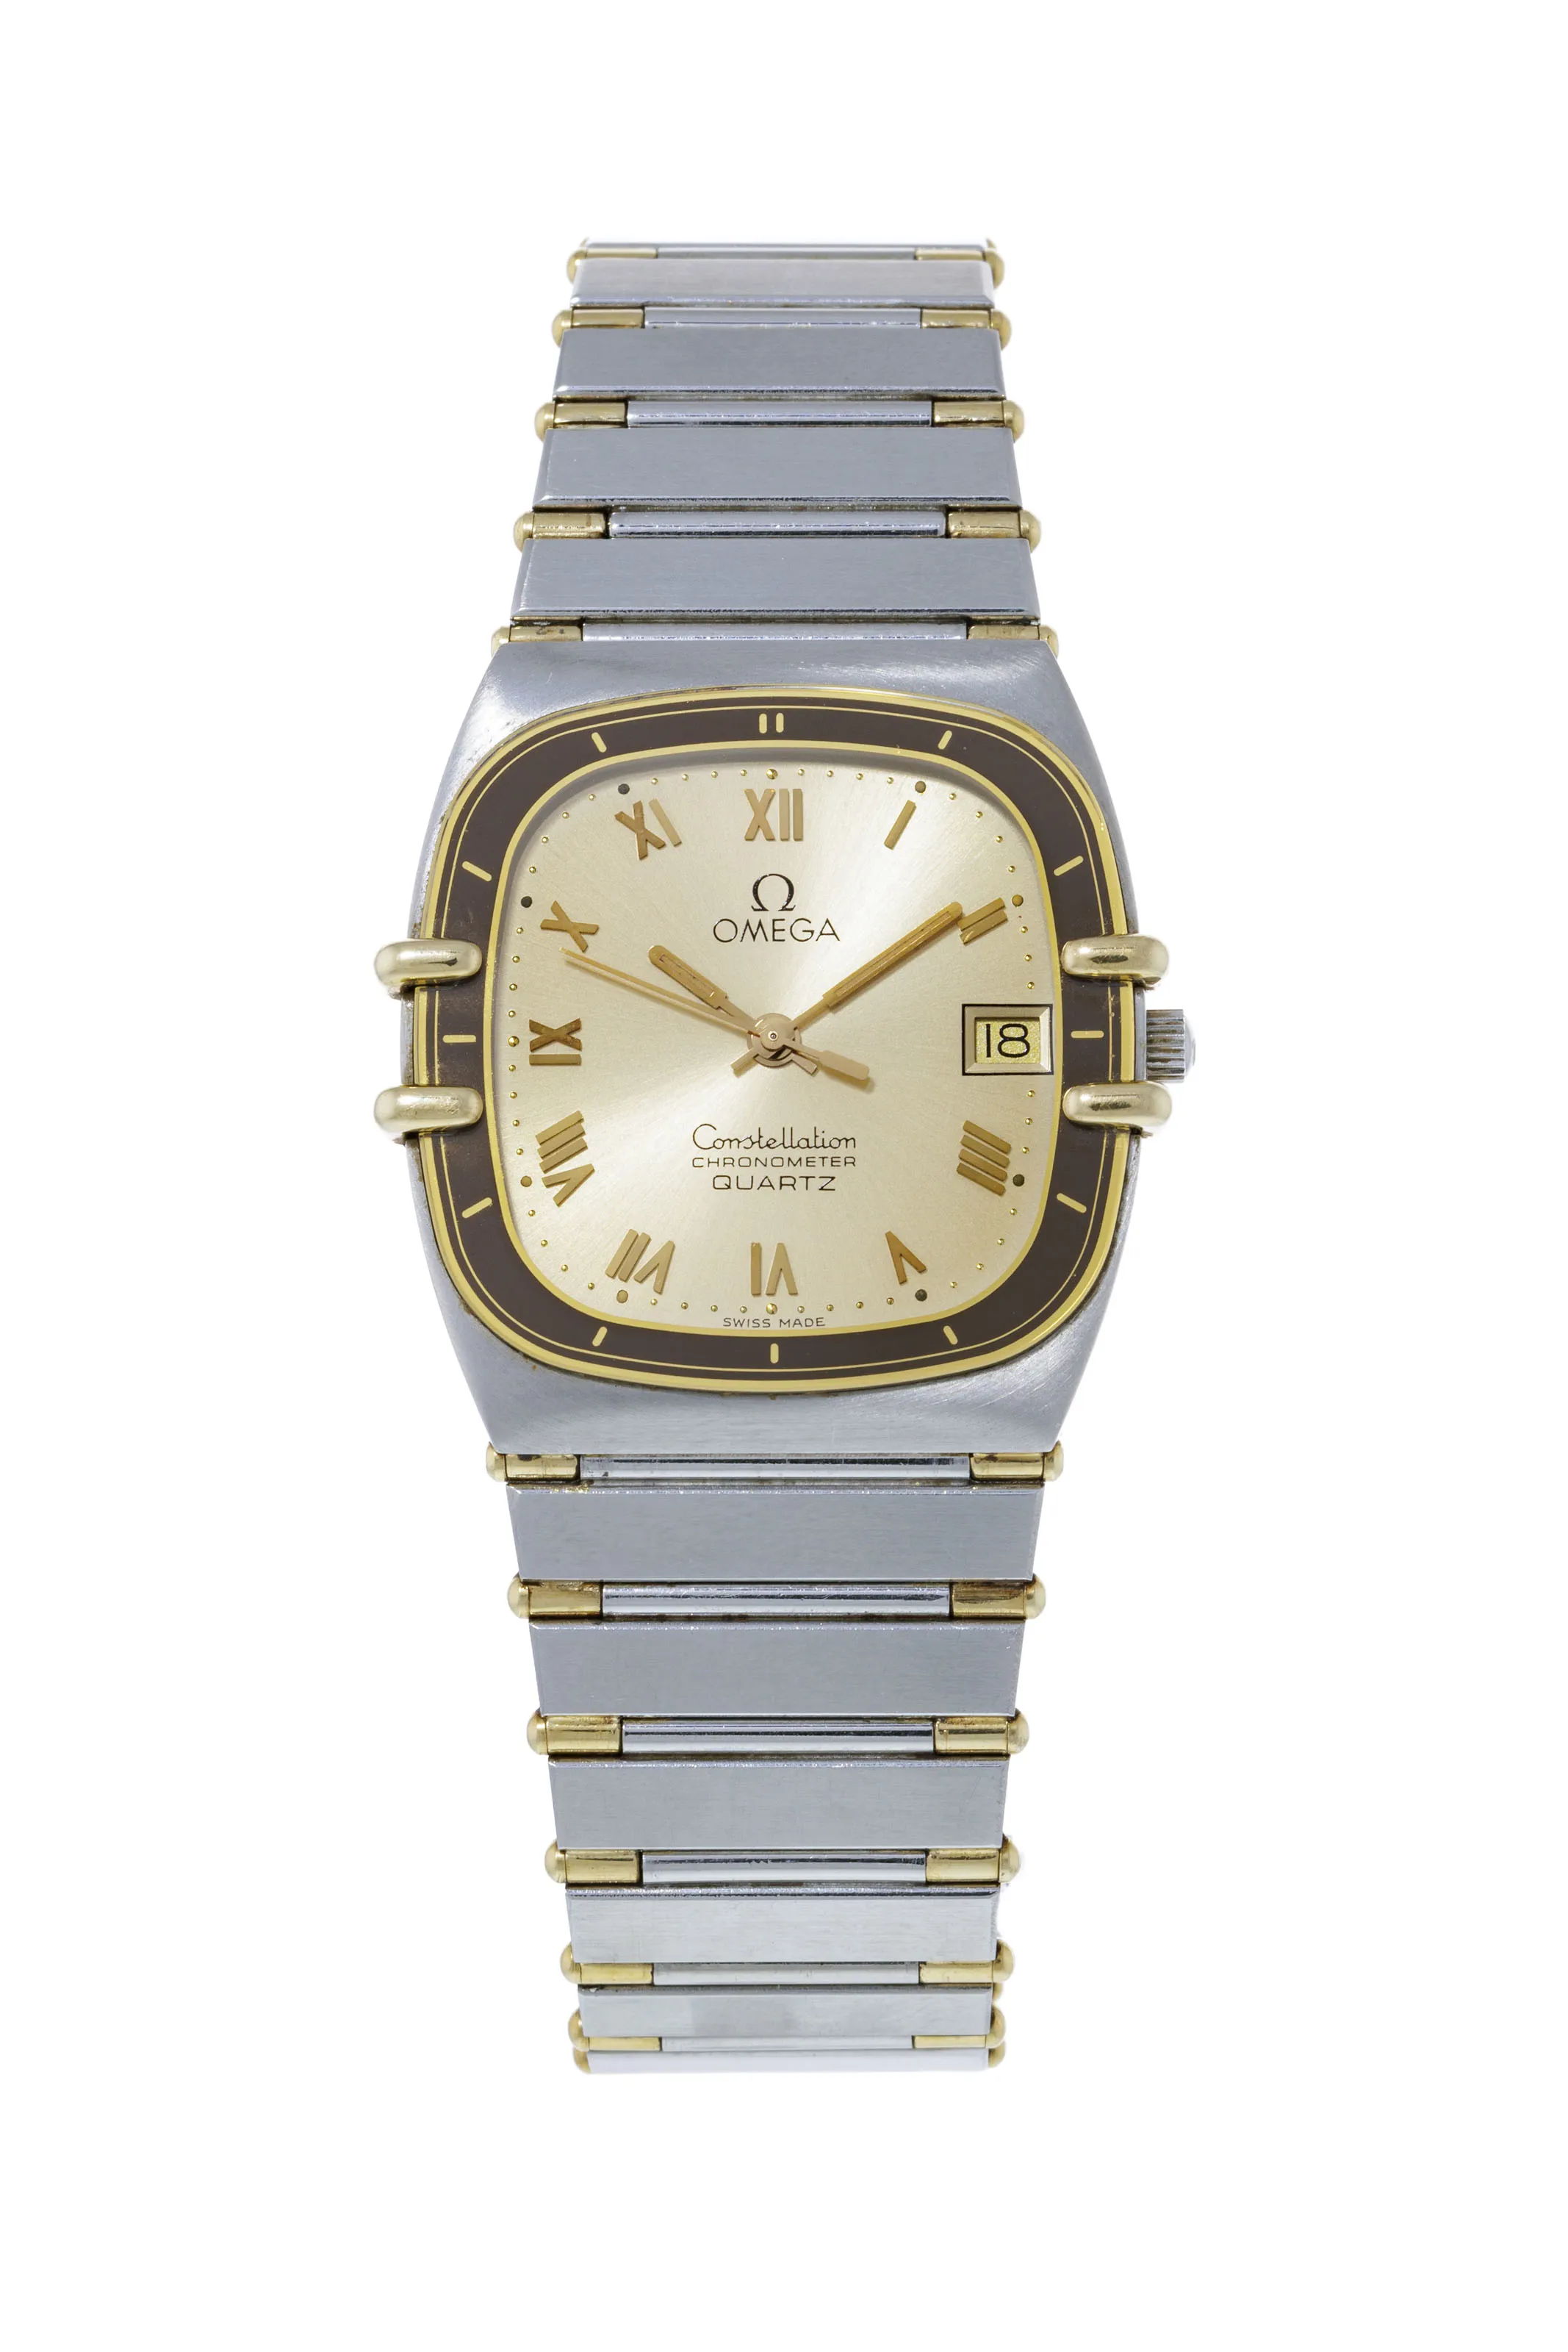 Omega Constellation 1980.141/398.0867 31mm Yellow gold and stainless steel Golden